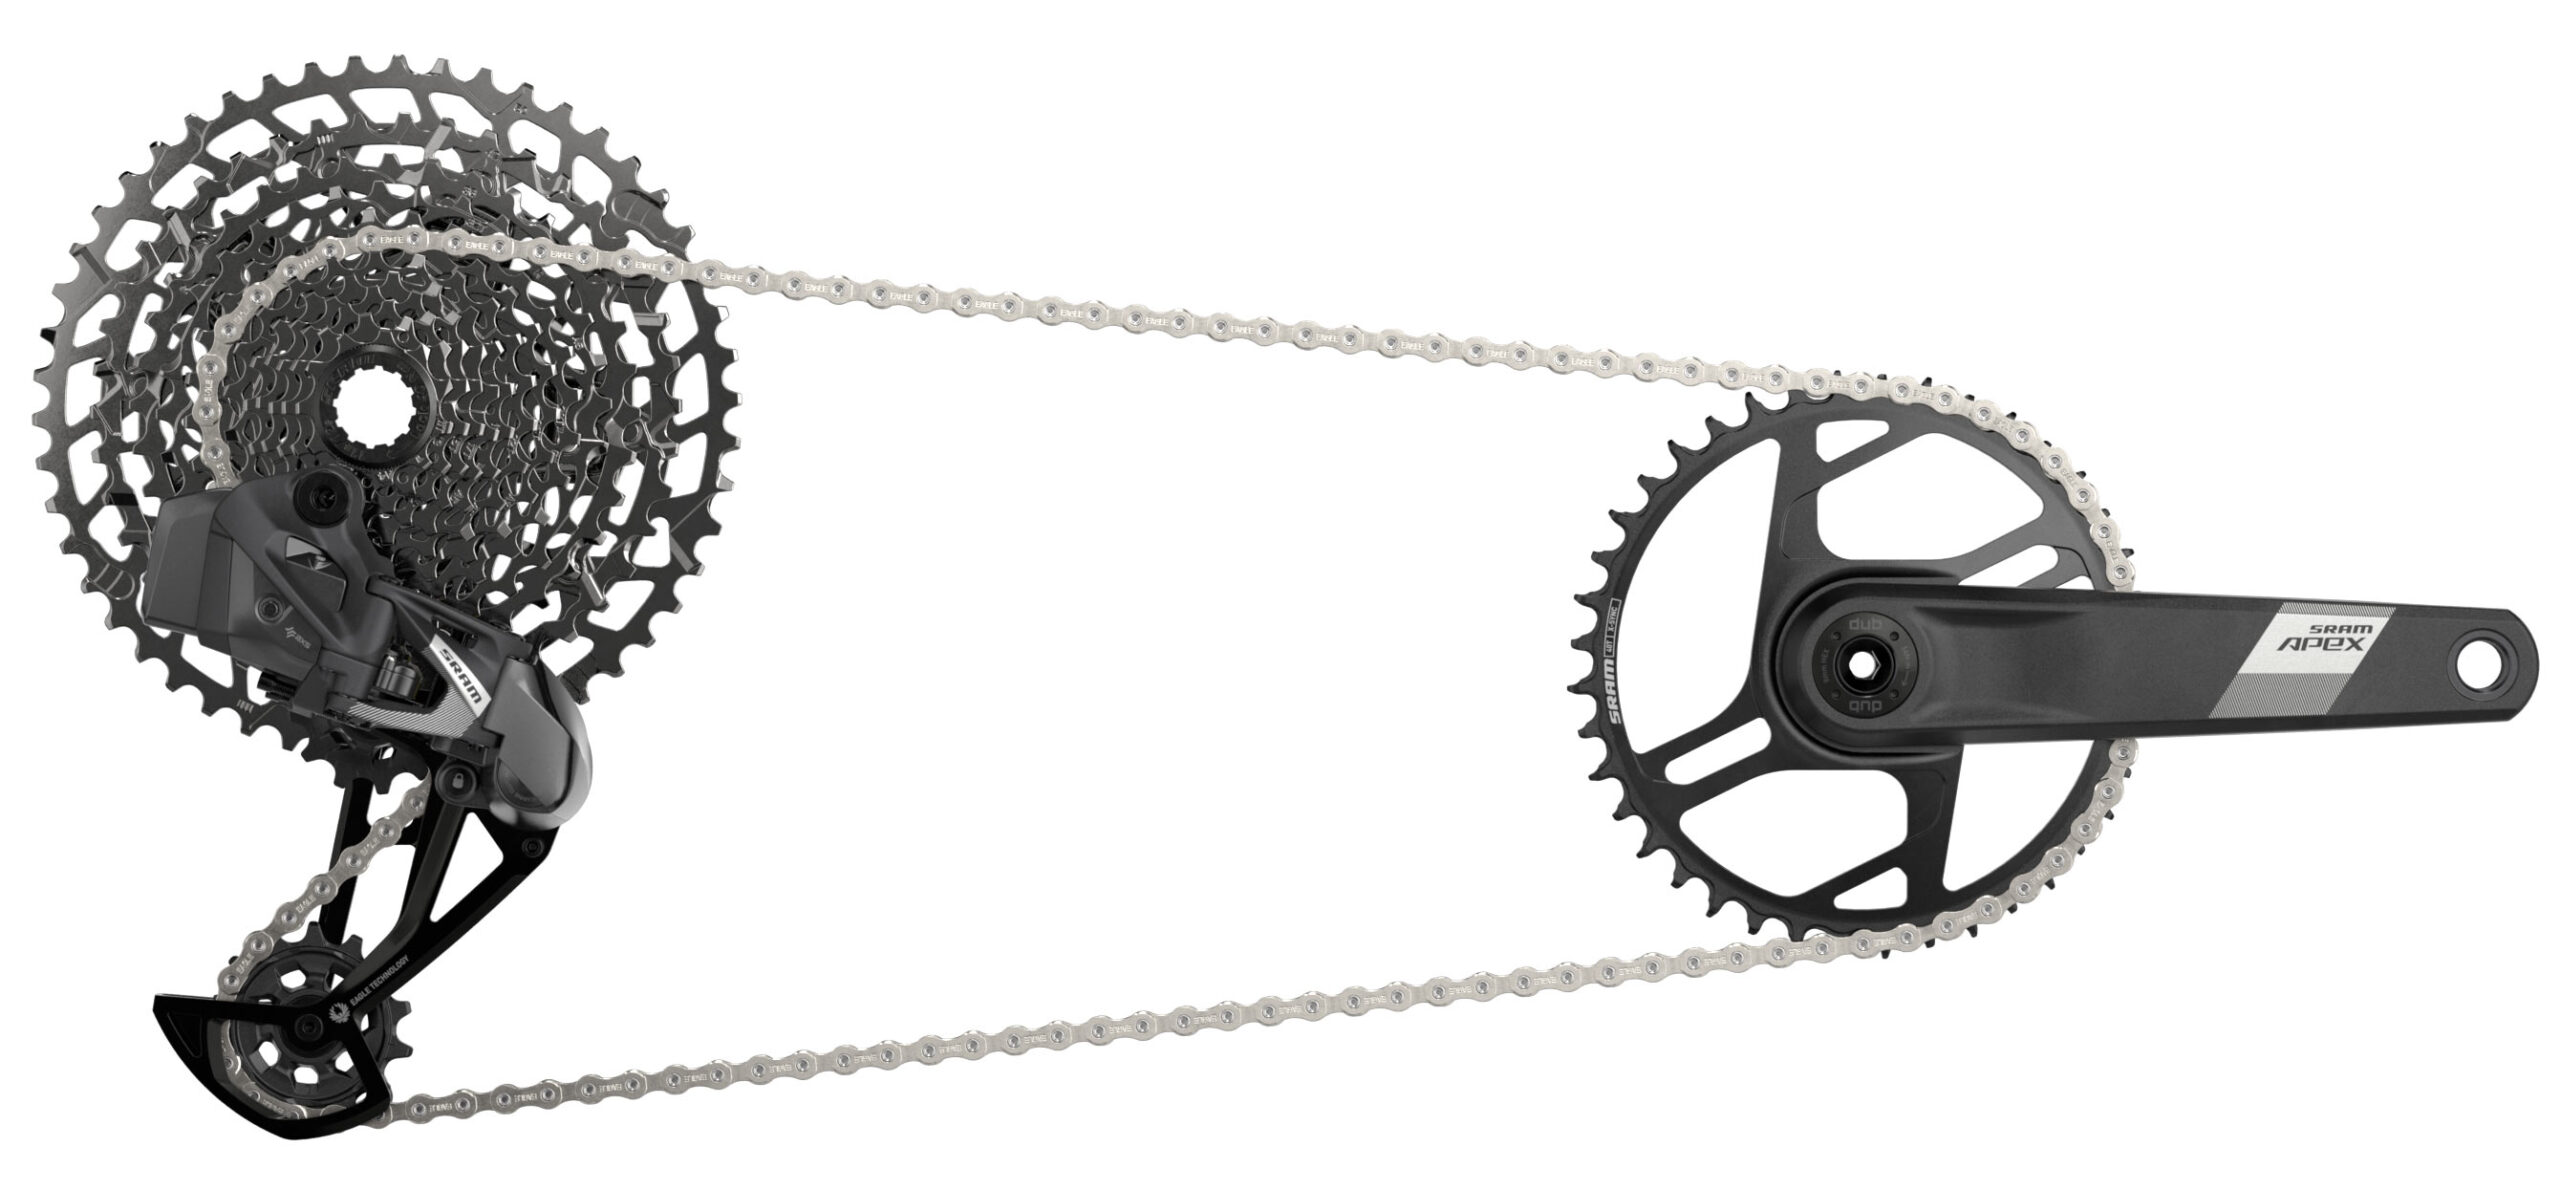 sram apex Eagle AXS 12-speed road and gravel bike group